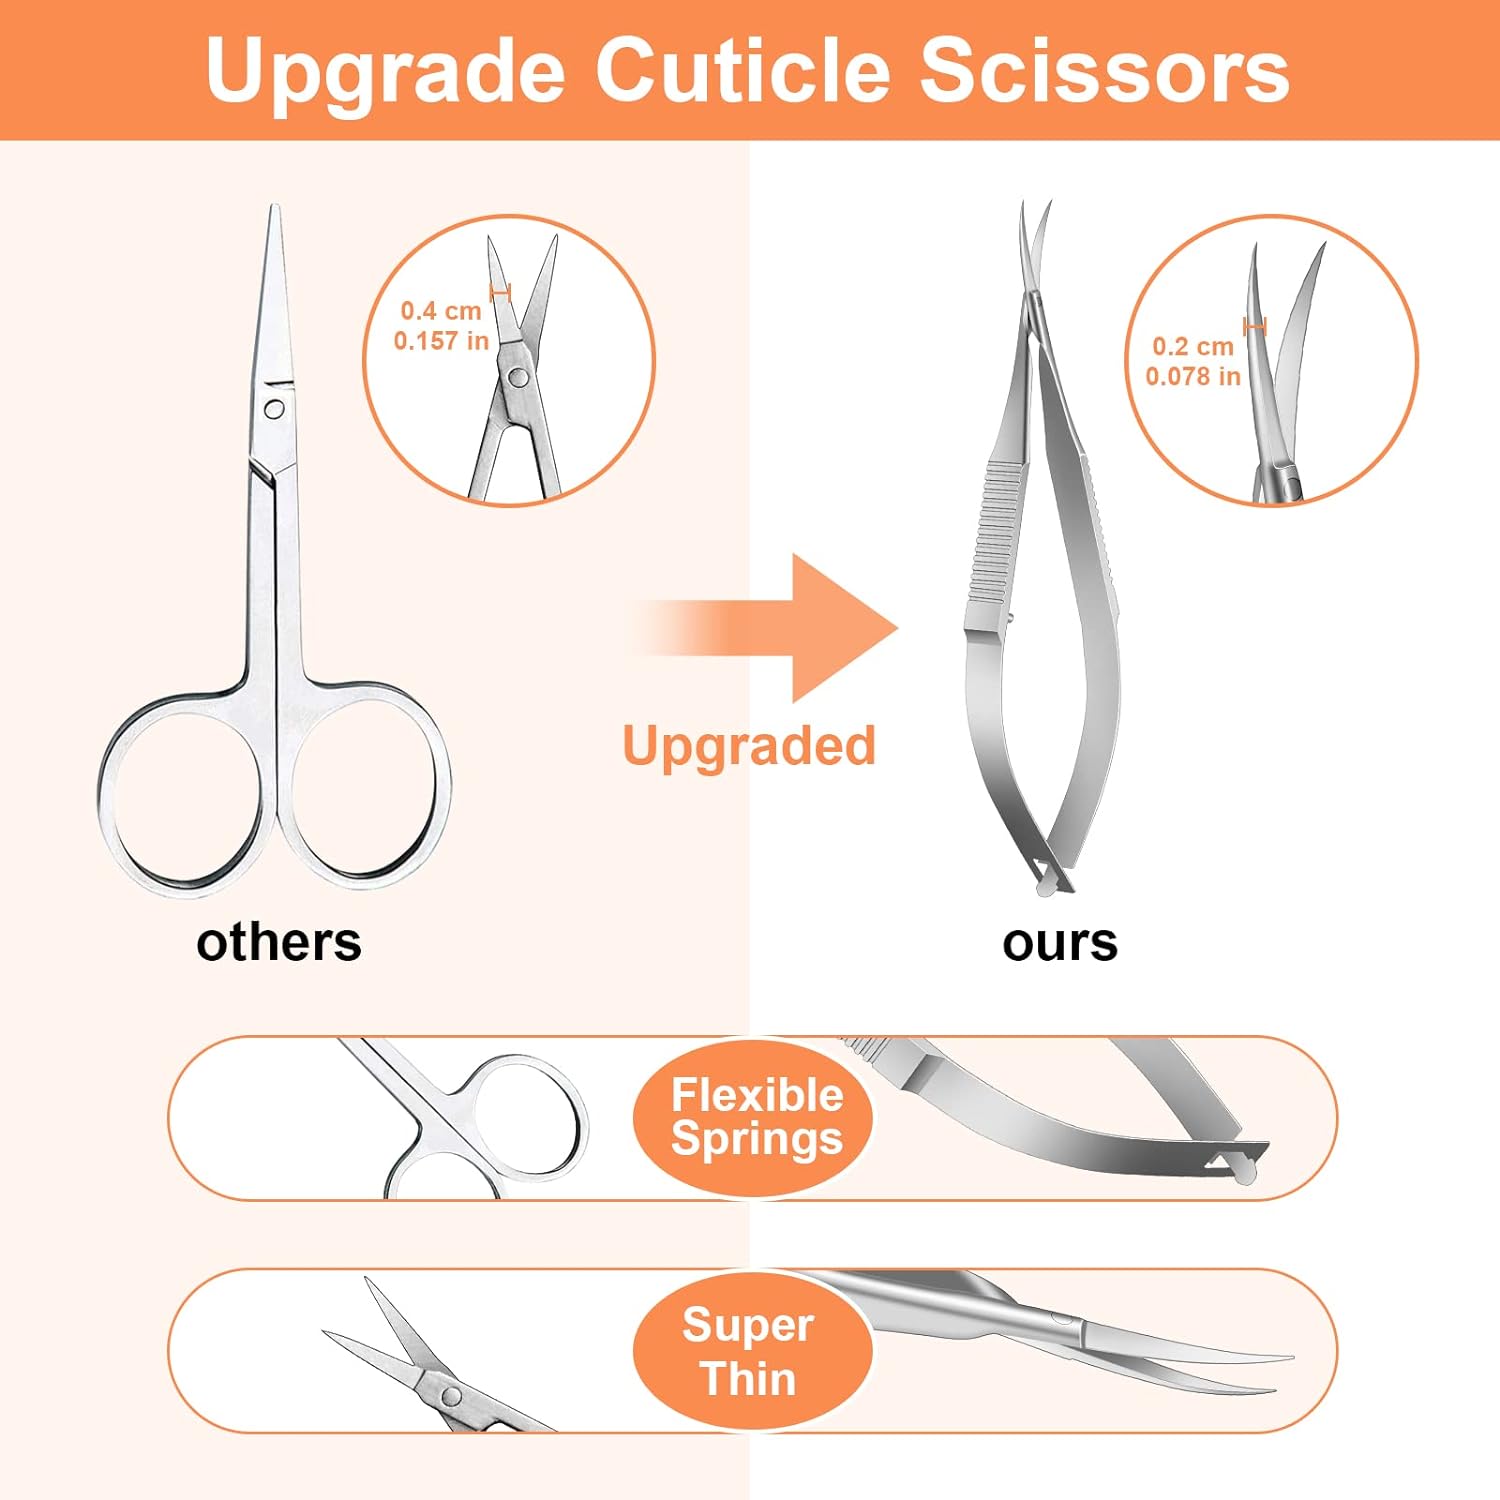 Spring Cuticle Nippers (Cuticle Scissors, Nail Scissors, Stainless Steel Curved Manicure Scissors, Cuticle Scissors Extra Fine Curved Cosmetic Scissors for Nail, Dry Skin, Eyebrow, Eyelash)